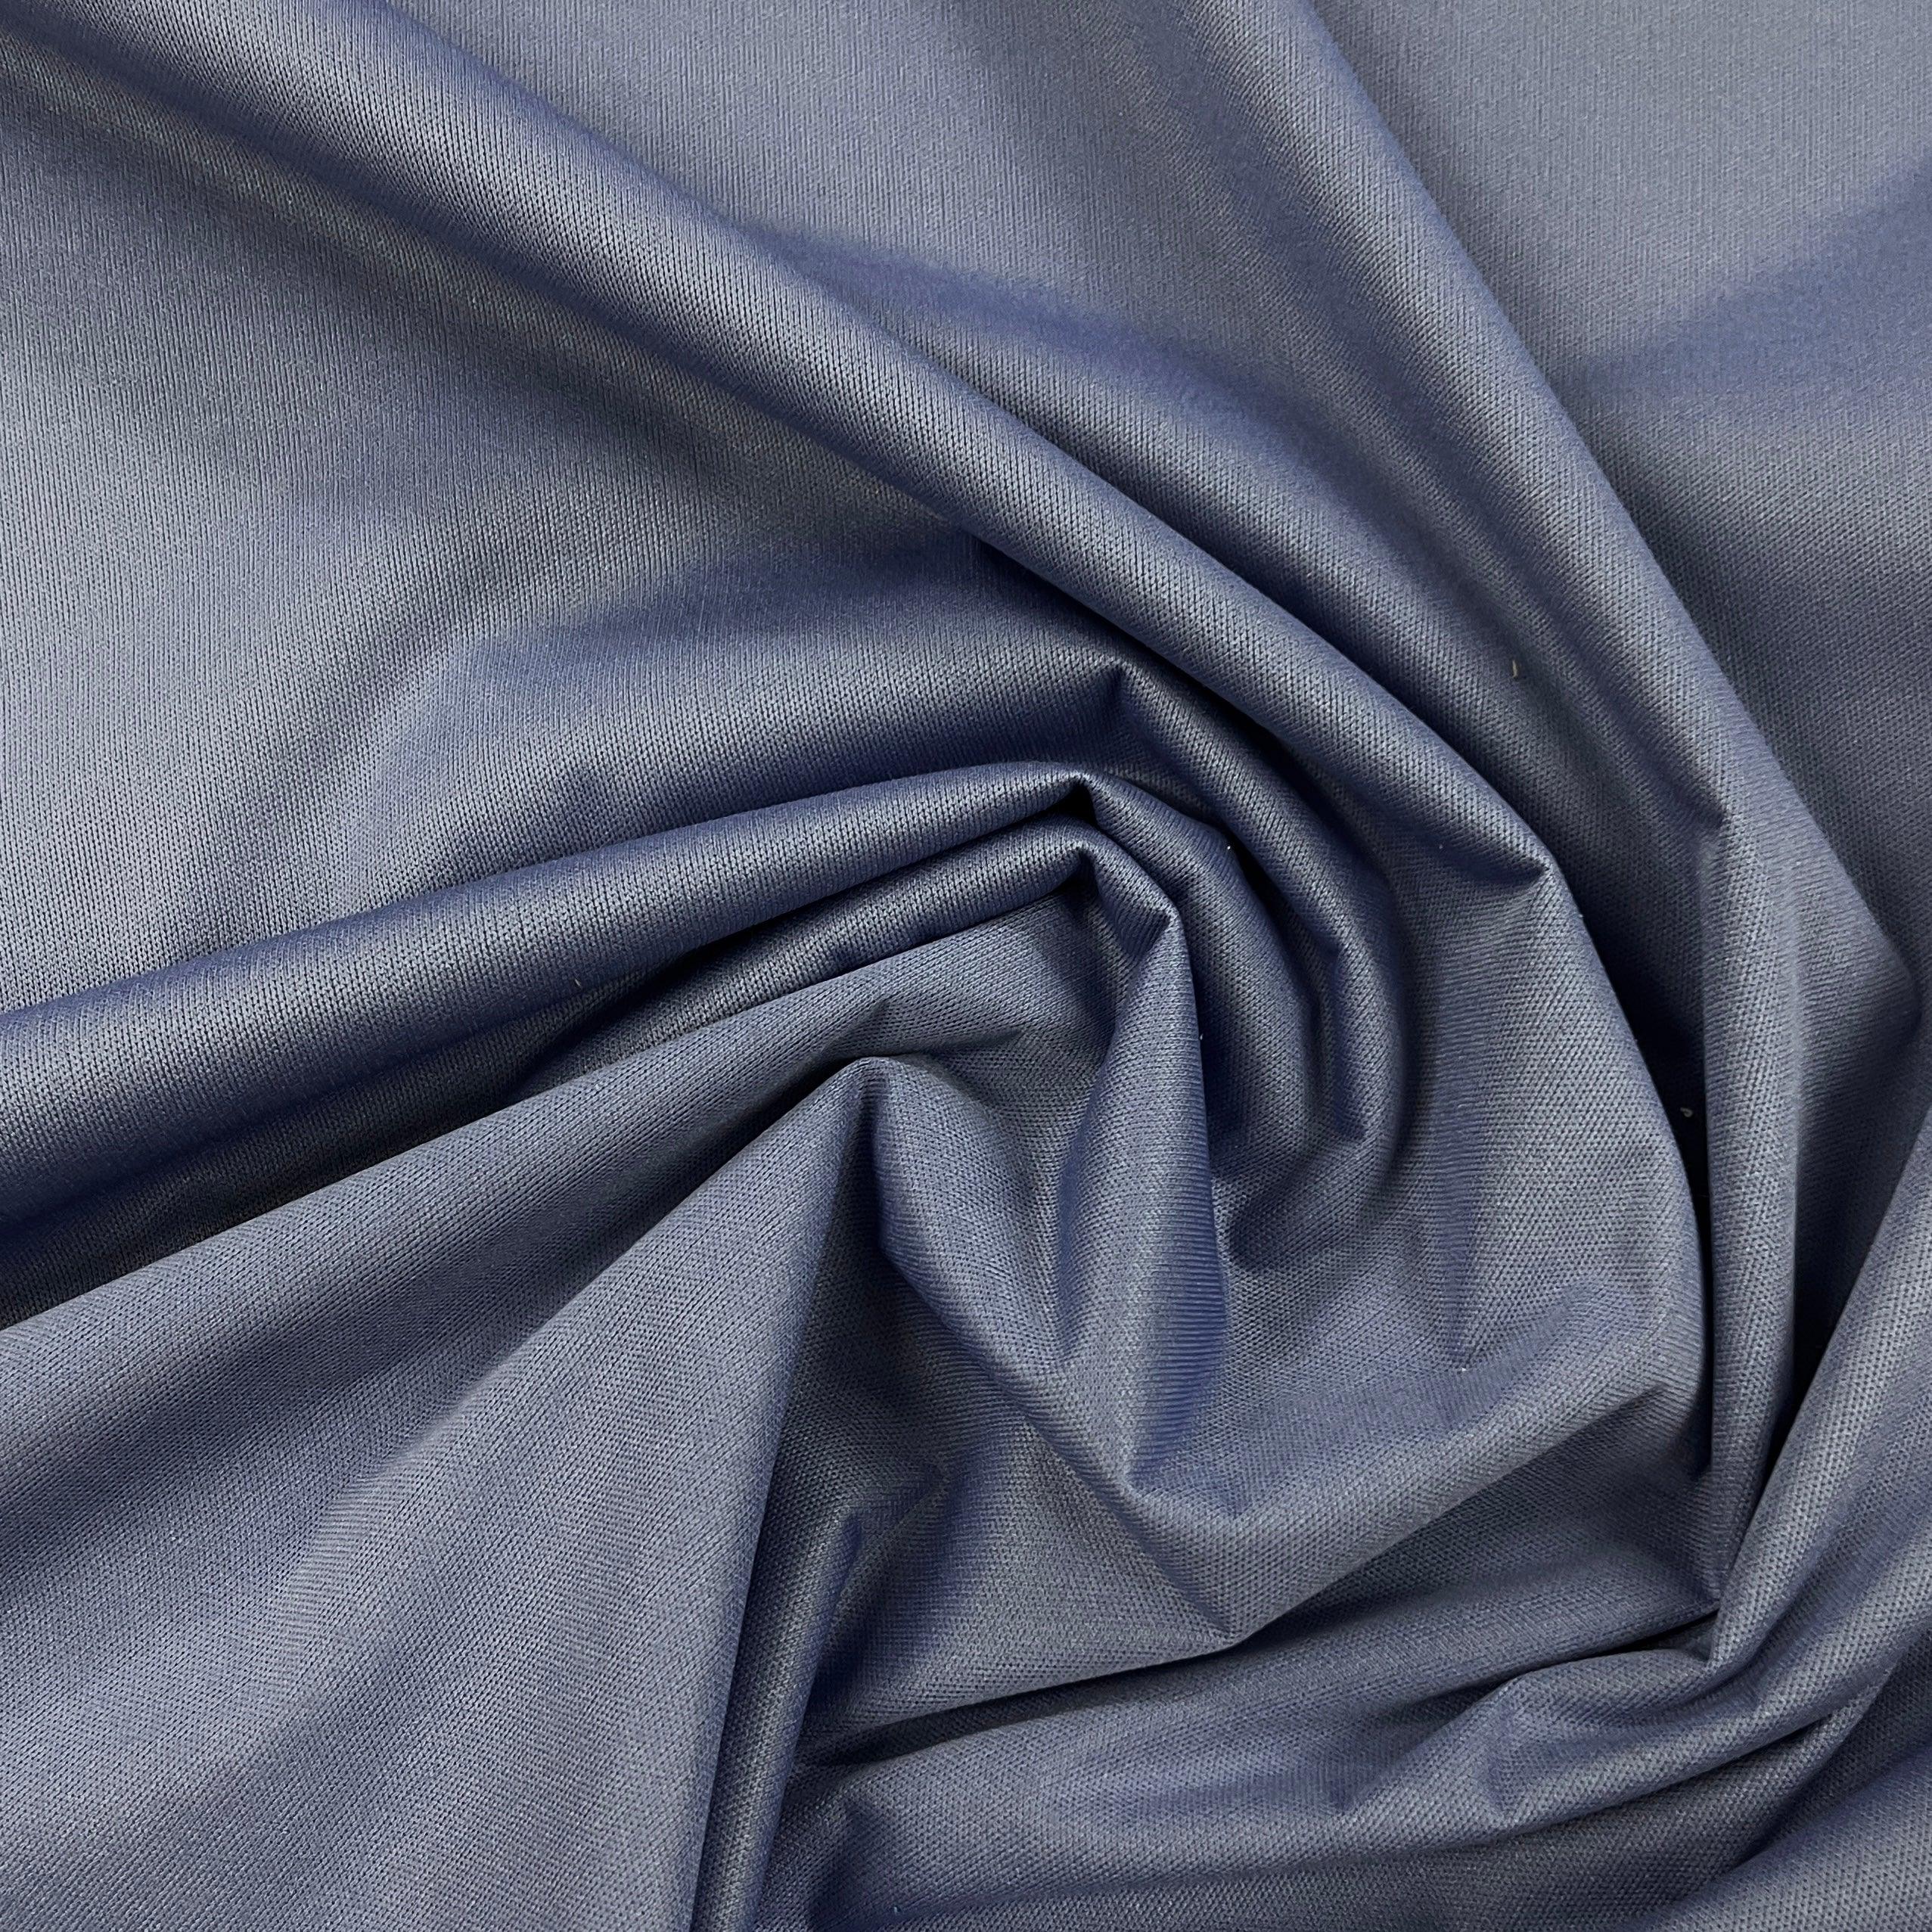 Denim Lycra Fabric Manufacturers and Suppliers in kurukshetra, Denim Lycra  Fabric Manufacturers and Suppliers in India